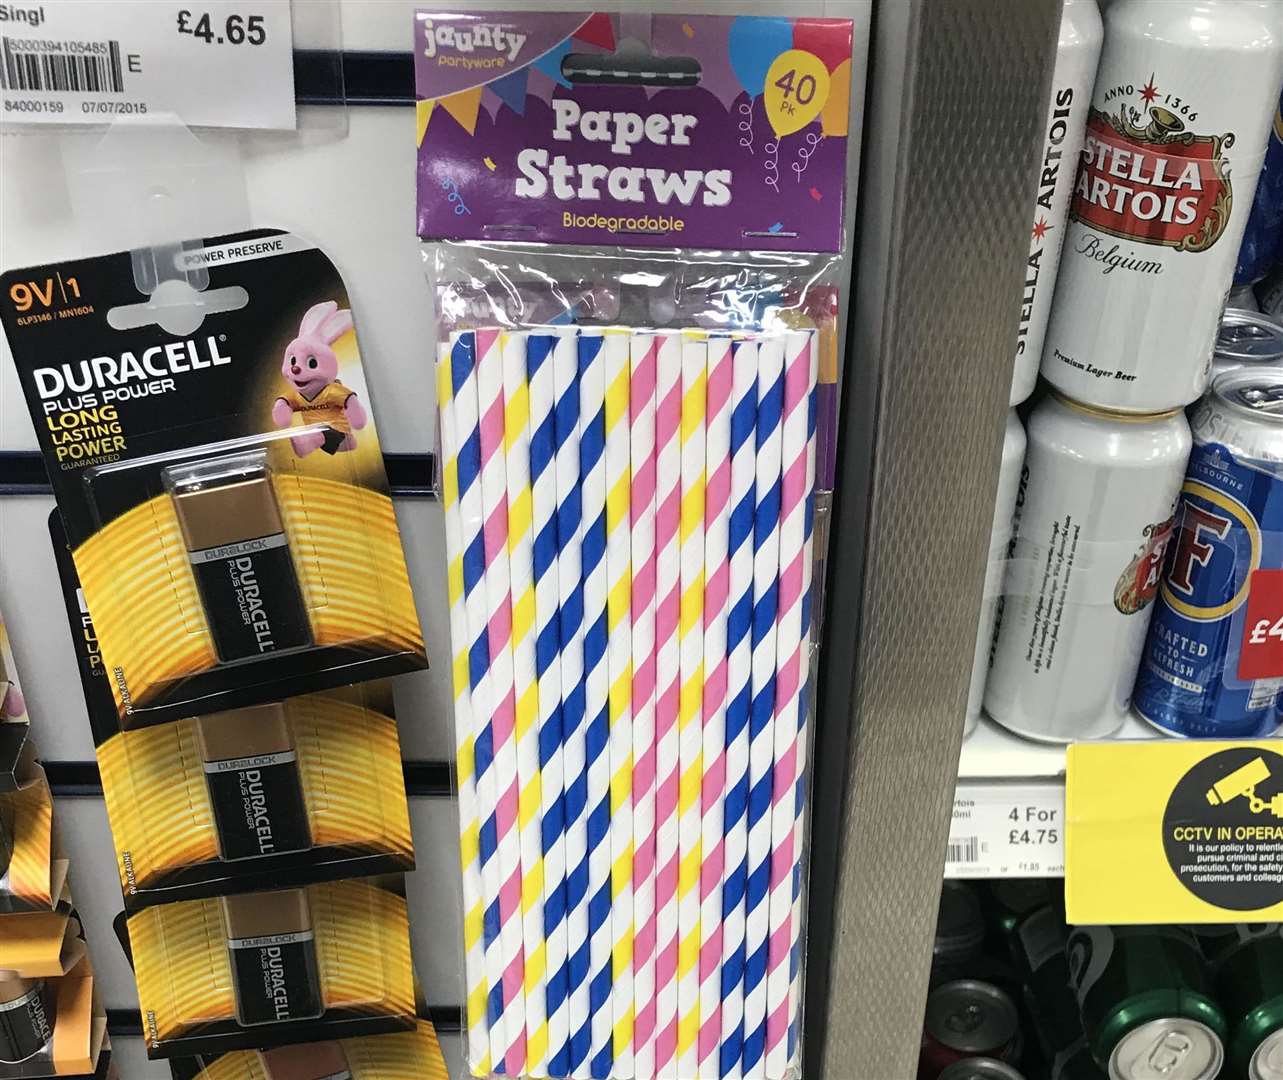 Paper straws found wrapped in plastic, McColl's in High Street, Maidstone